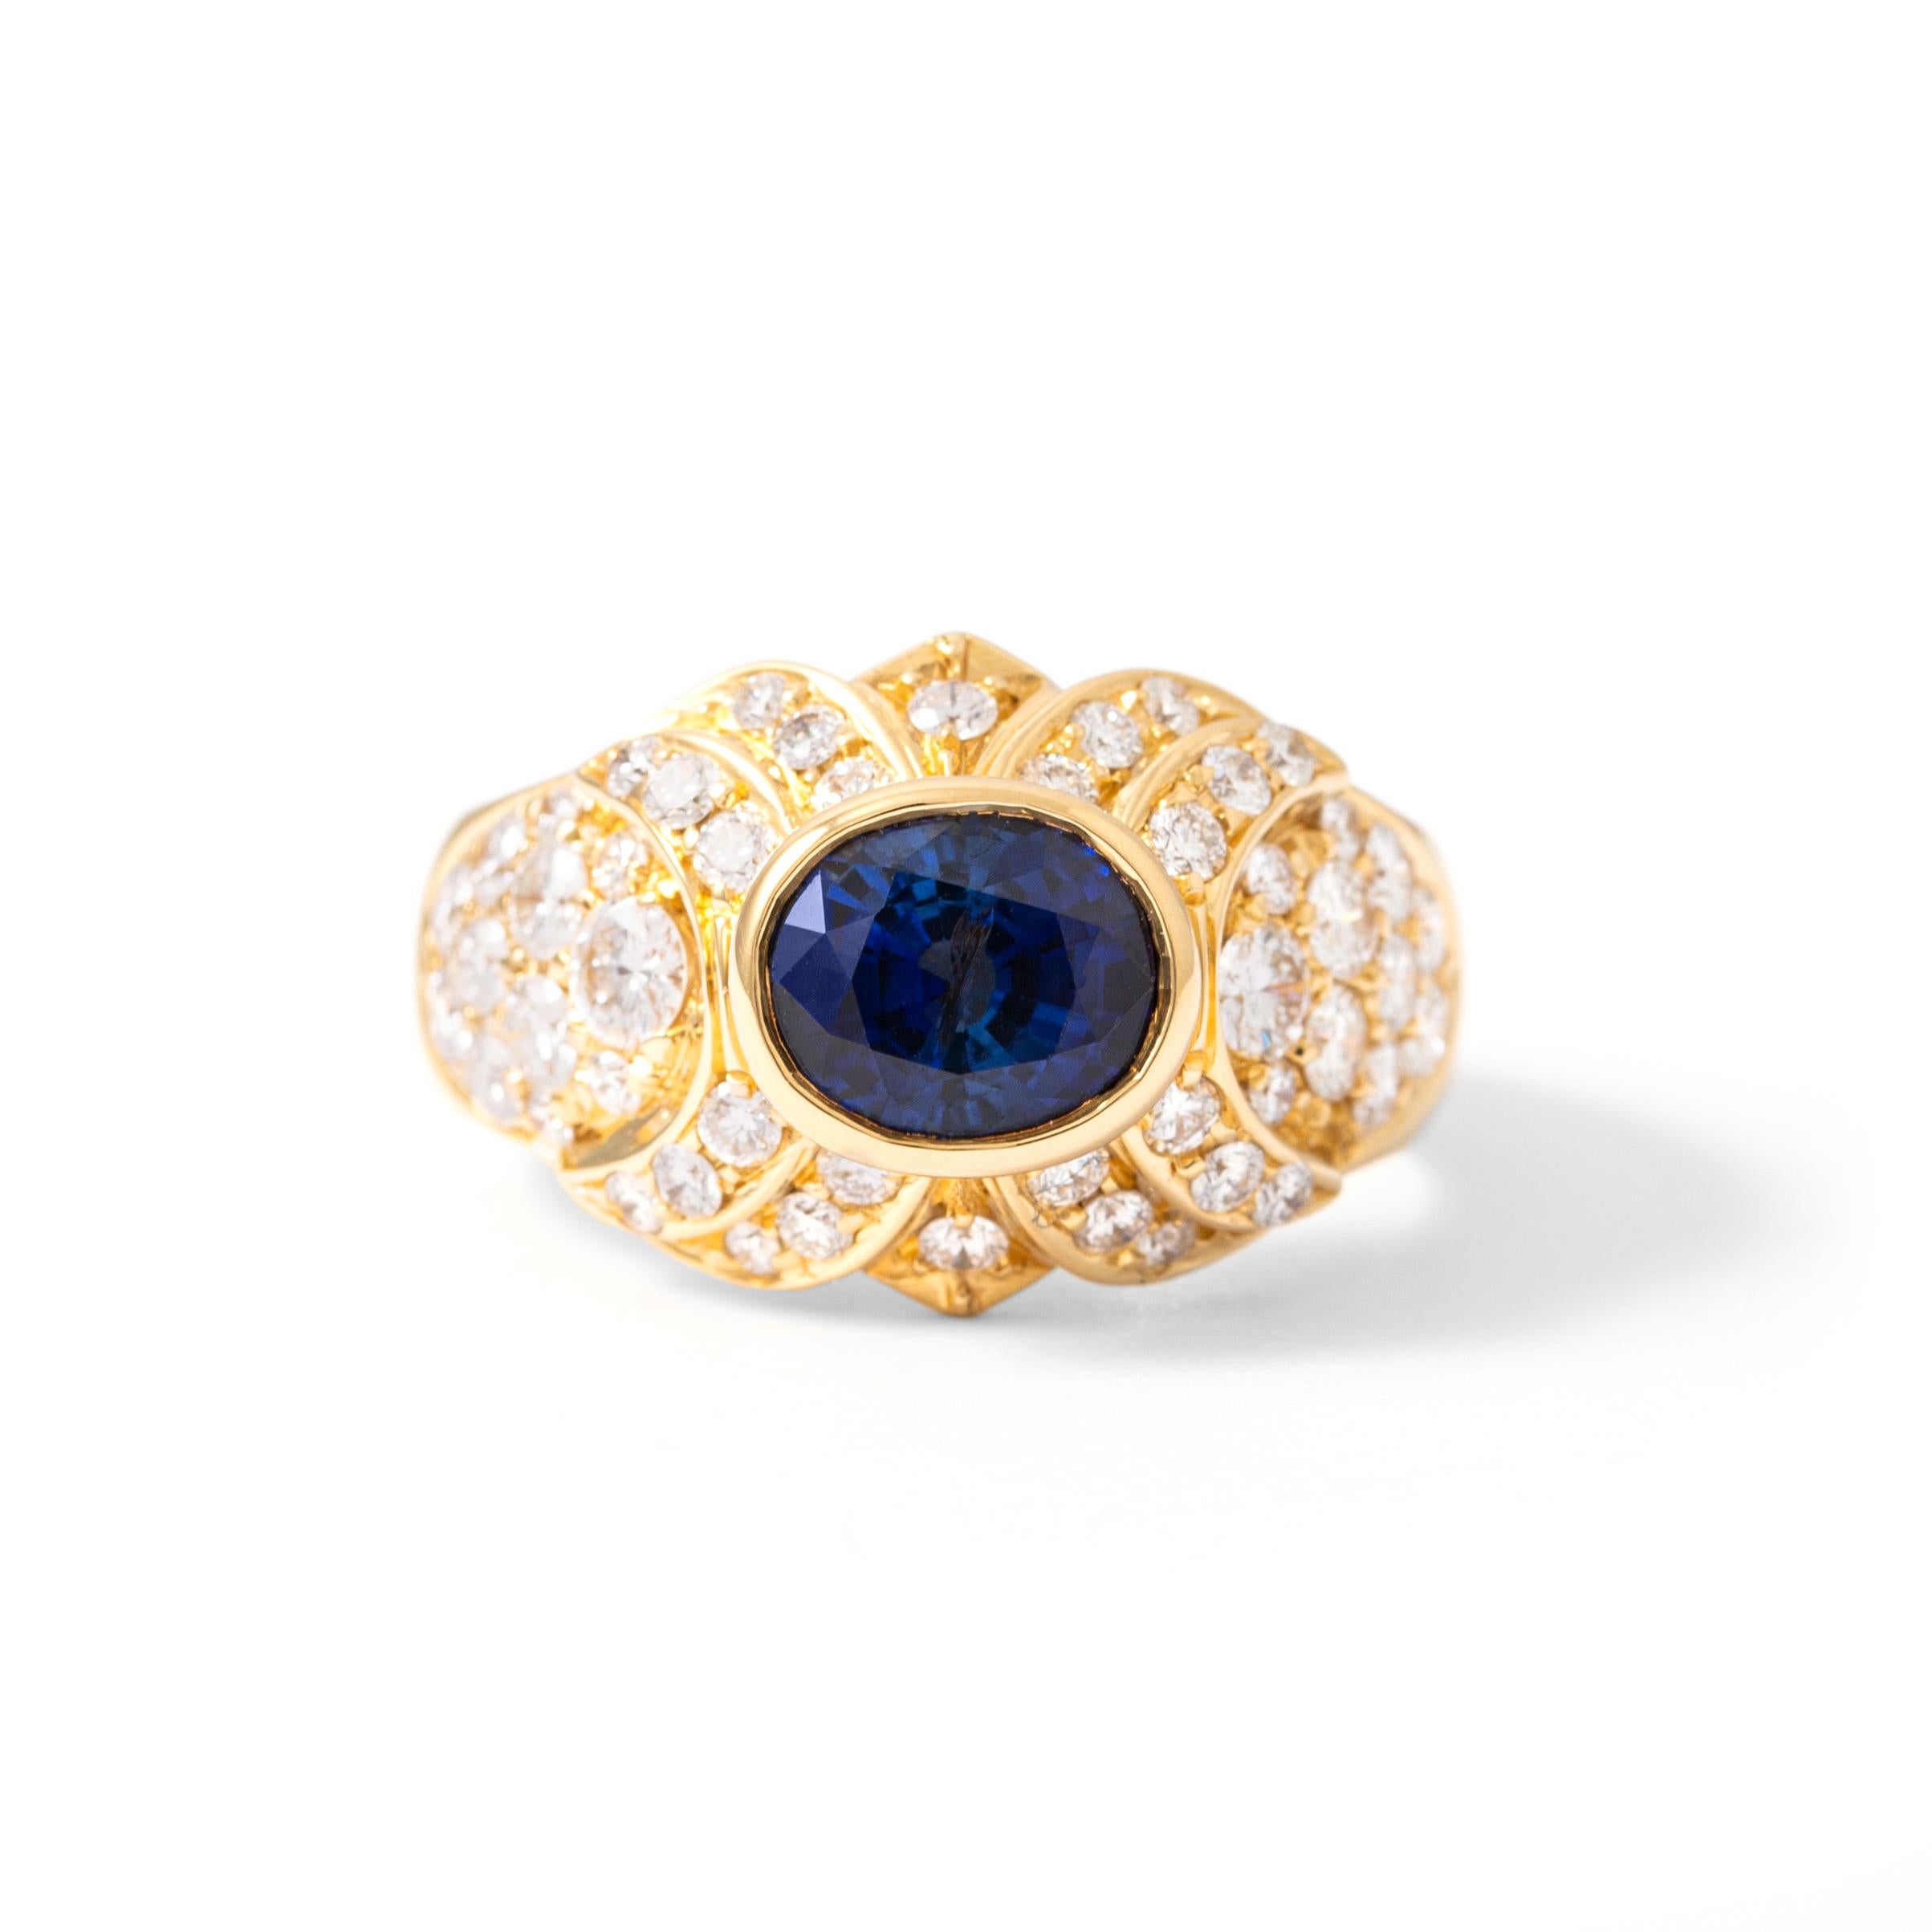 Ring in 18kt yellow gold set with one oval cut sapphire 2.11 cts and 50diamonds 1.05 cts Size 52